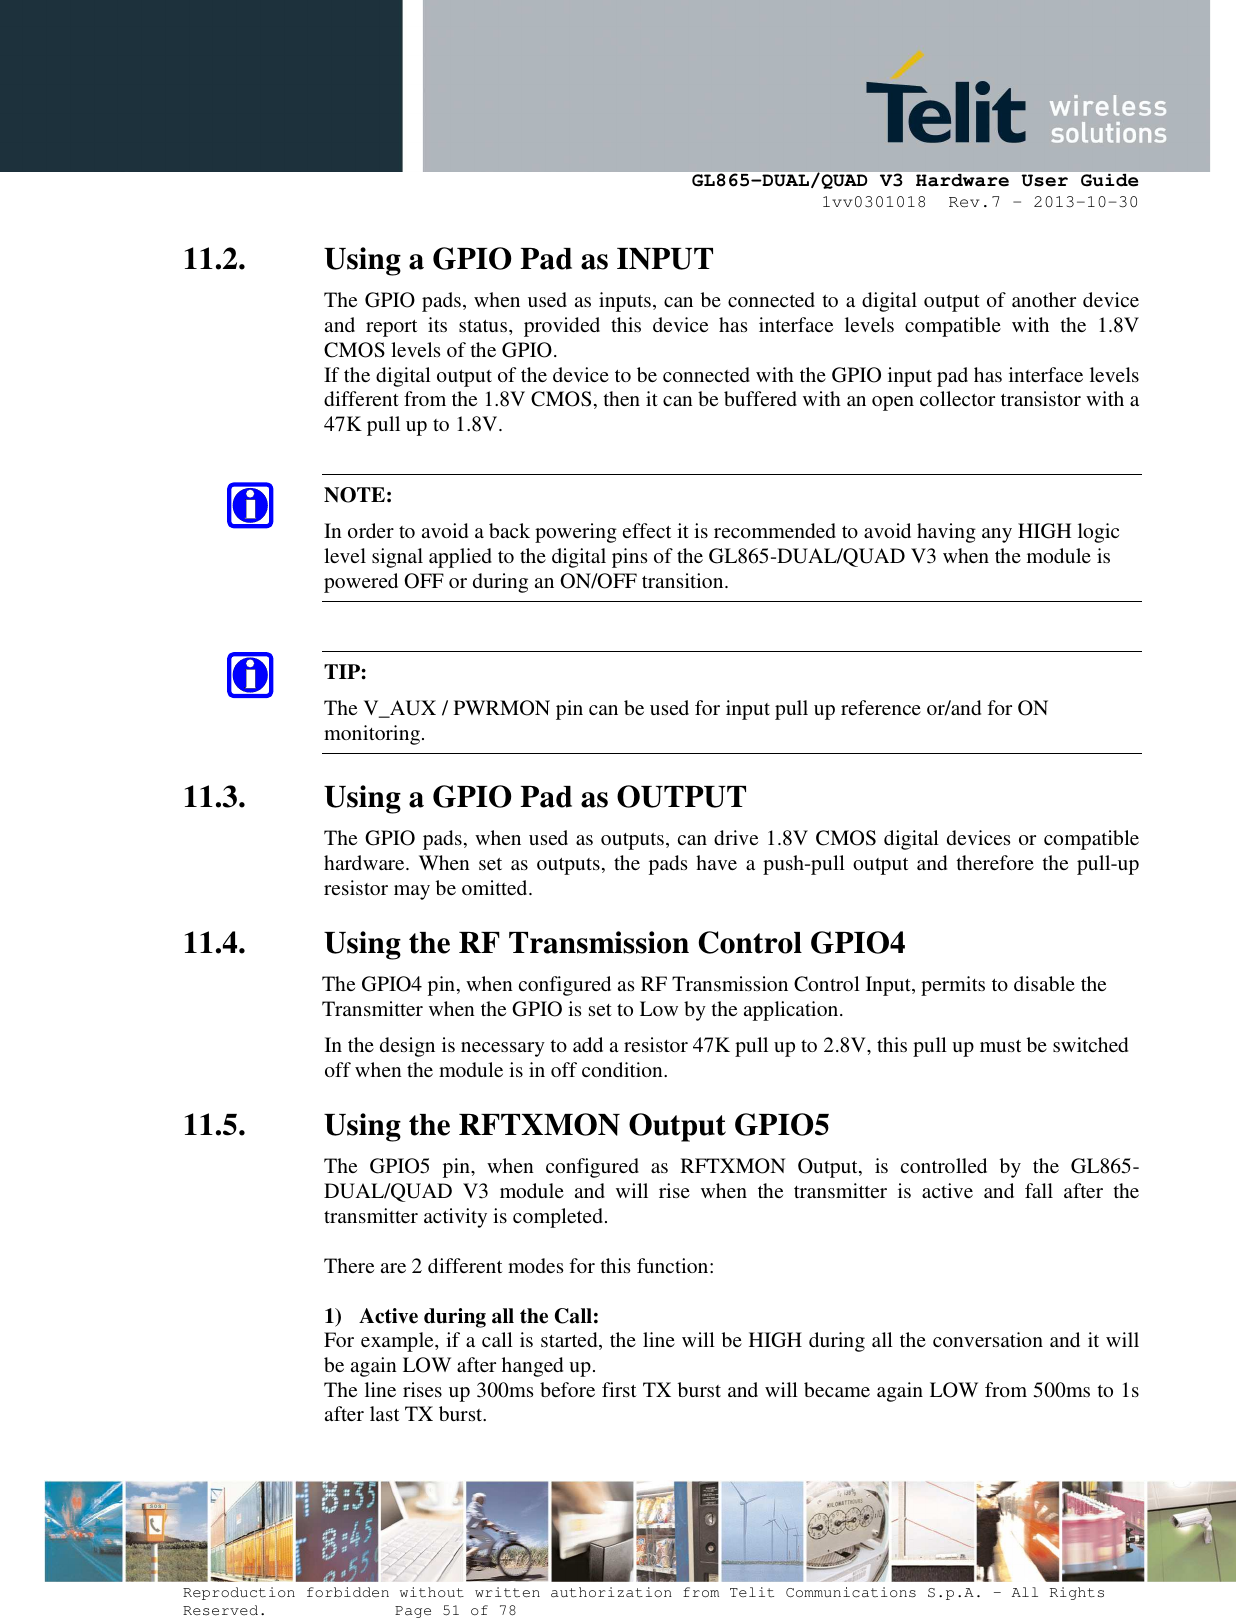      GL865-DUAL/QUAD V3 Hardware User Guide 1vv0301018  Rev.7 – 2013-10-30  Reproduction forbidden without written authorization from Telit Communications S.p.A. - All Rights Reserved.    Page 51 of 78 Mod. 0805 2011-07 Rev.2 11.2. Using a GPIO Pad as INPUT The GPIO pads, when used as inputs, can be connected to a digital output of another device and  report  its  status,  provided  this  device  has  interface  levels  compatible  with  the  1.8V CMOS levels of the GPIO.  If the digital output of the device to be connected with the GPIO input pad has interface levels different from the 1.8V CMOS, then it can be buffered with an open collector transistor with a 47K pull up to 1.8V.  NOTE: In order to avoid a back powering effect it is recommended to avoid having any HIGH logic level signal applied to the digital pins of the GL865-DUAL/QUAD V3 when the module is powered OFF or during an ON/OFF transition.  TIP: The V_AUX / PWRMON pin can be used for input pull up reference or/and for ON monitoring. 11.3. Using a GPIO Pad as OUTPUT The GPIO pads, when used as outputs, can drive 1.8V CMOS digital devices or compatible hardware. When set as outputs, the pads have a push-pull output and therefore the pull-up resistor may be omitted. 11.4. Using the RF Transmission Control GPIO4 The GPIO4 pin, when configured as RF Transmission Control Input, permits to disable the Transmitter when the GPIO is set to Low by the application. In the design is necessary to add a resistor 47K pull up to 2.8V, this pull up must be switched off when the module is in off condition. 11.5. Using the RFTXMON Output GPIO5 The  GPIO5  pin,  when  configured  as  RFTXMON  Output,  is  controlled  by  the  GL865-DUAL/QUAD  V3  module  and  will  rise  when  the  transmitter  is  active  and  fall  after  the transmitter activity is completed.  There are 2 different modes for this function:  1) Active during all the Call: For example, if a call is started, the line will be HIGH during all the conversation and it will be again LOW after hanged up. The line rises up 300ms before first TX burst and will became again LOW from 500ms to 1s after last TX burst.   